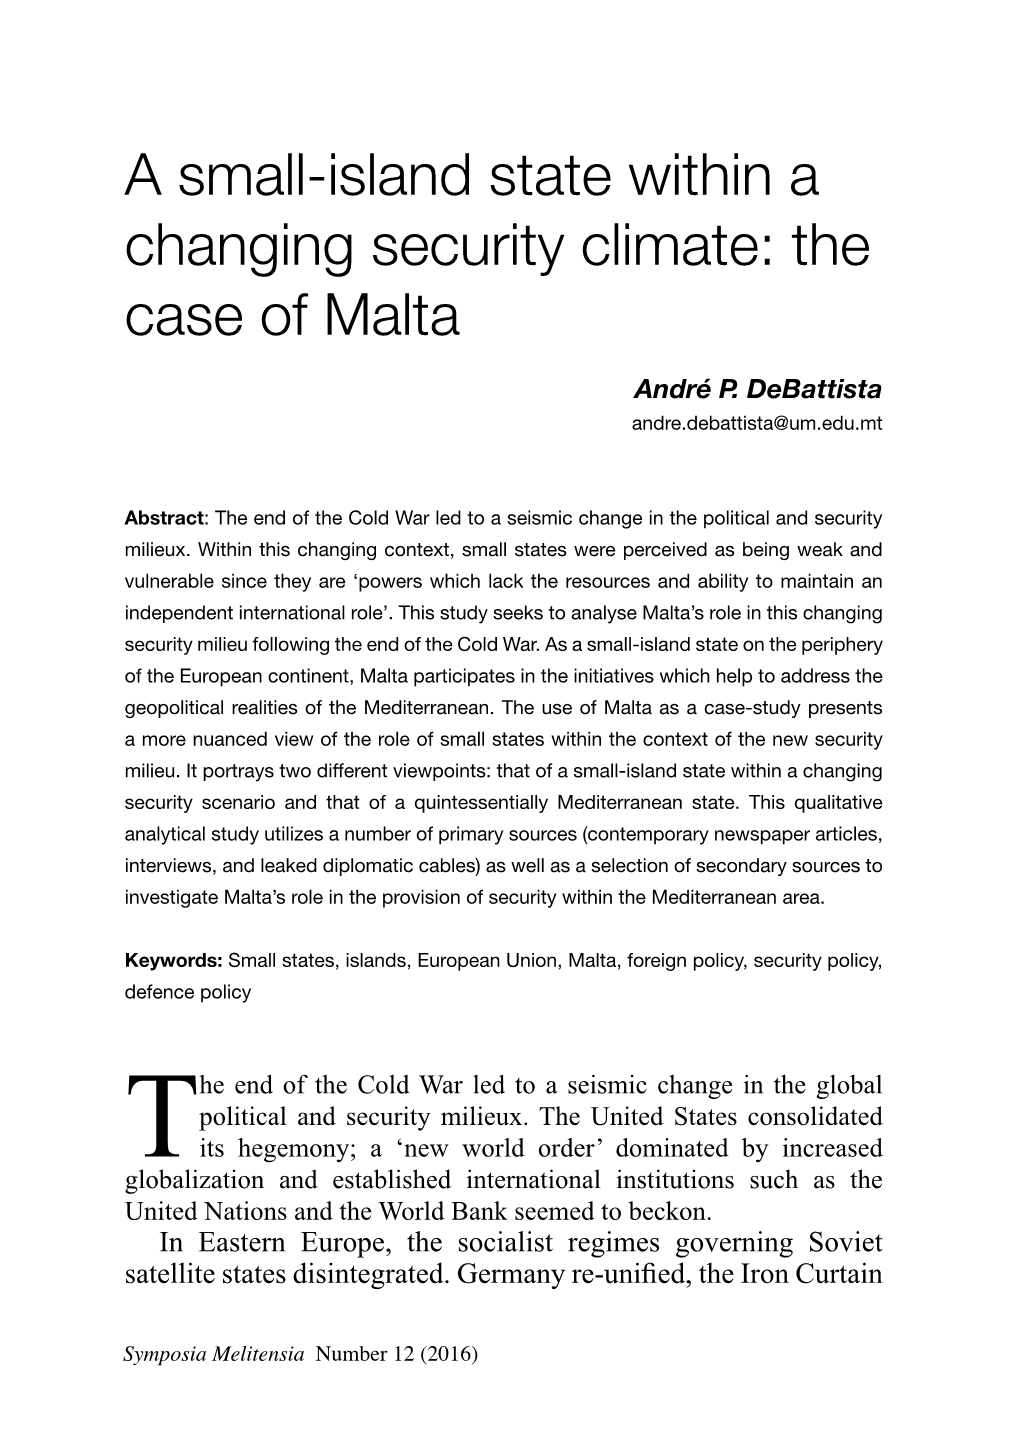 A Small-Island State Within a Changing Security Climate: the Case of Malta